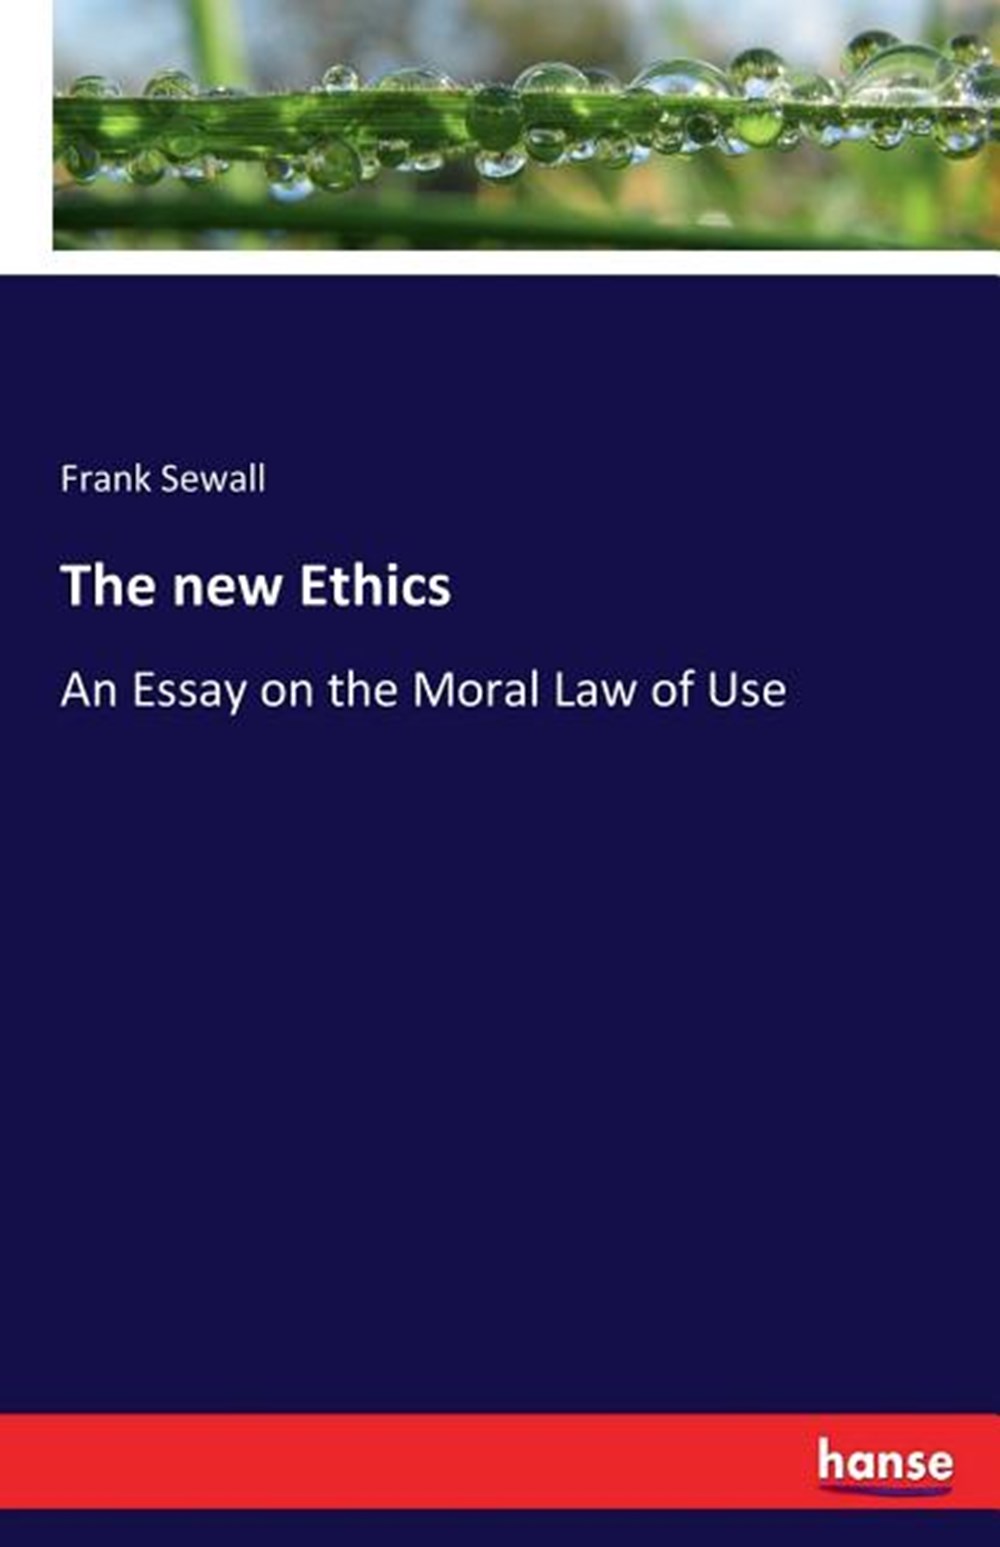 new Ethics: An Essay on the Moral Law of Use